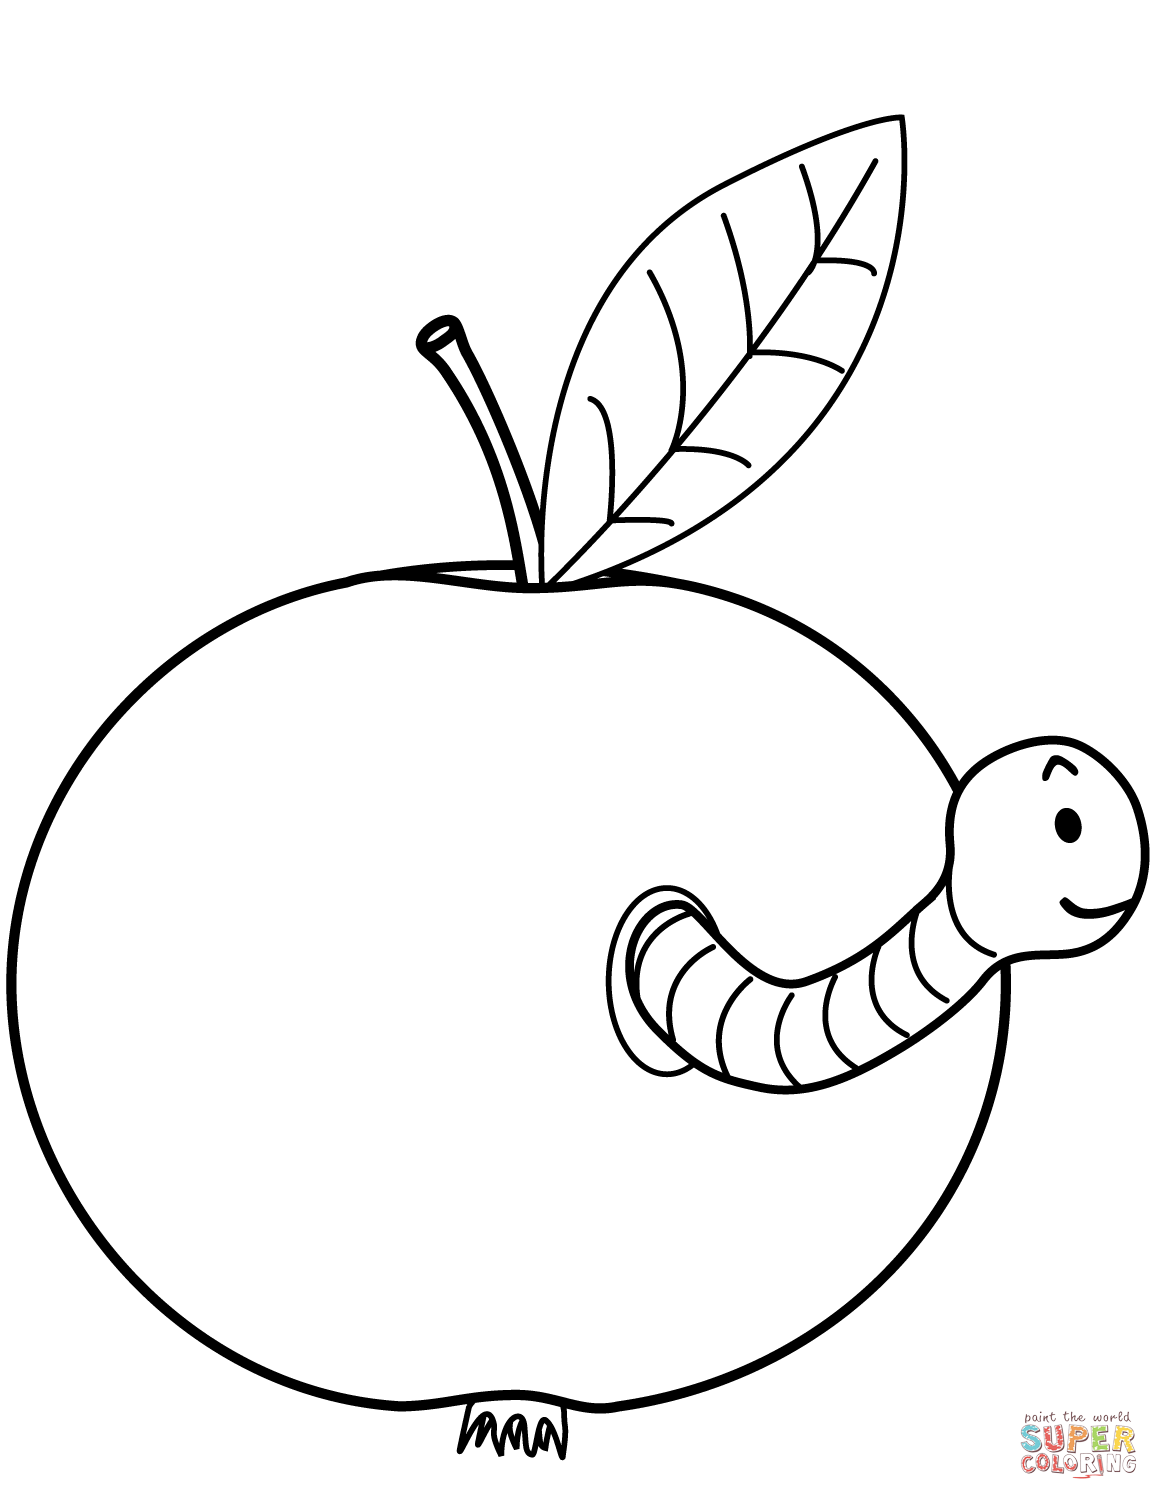 Fruits coloring pages | Free Coloring Pages